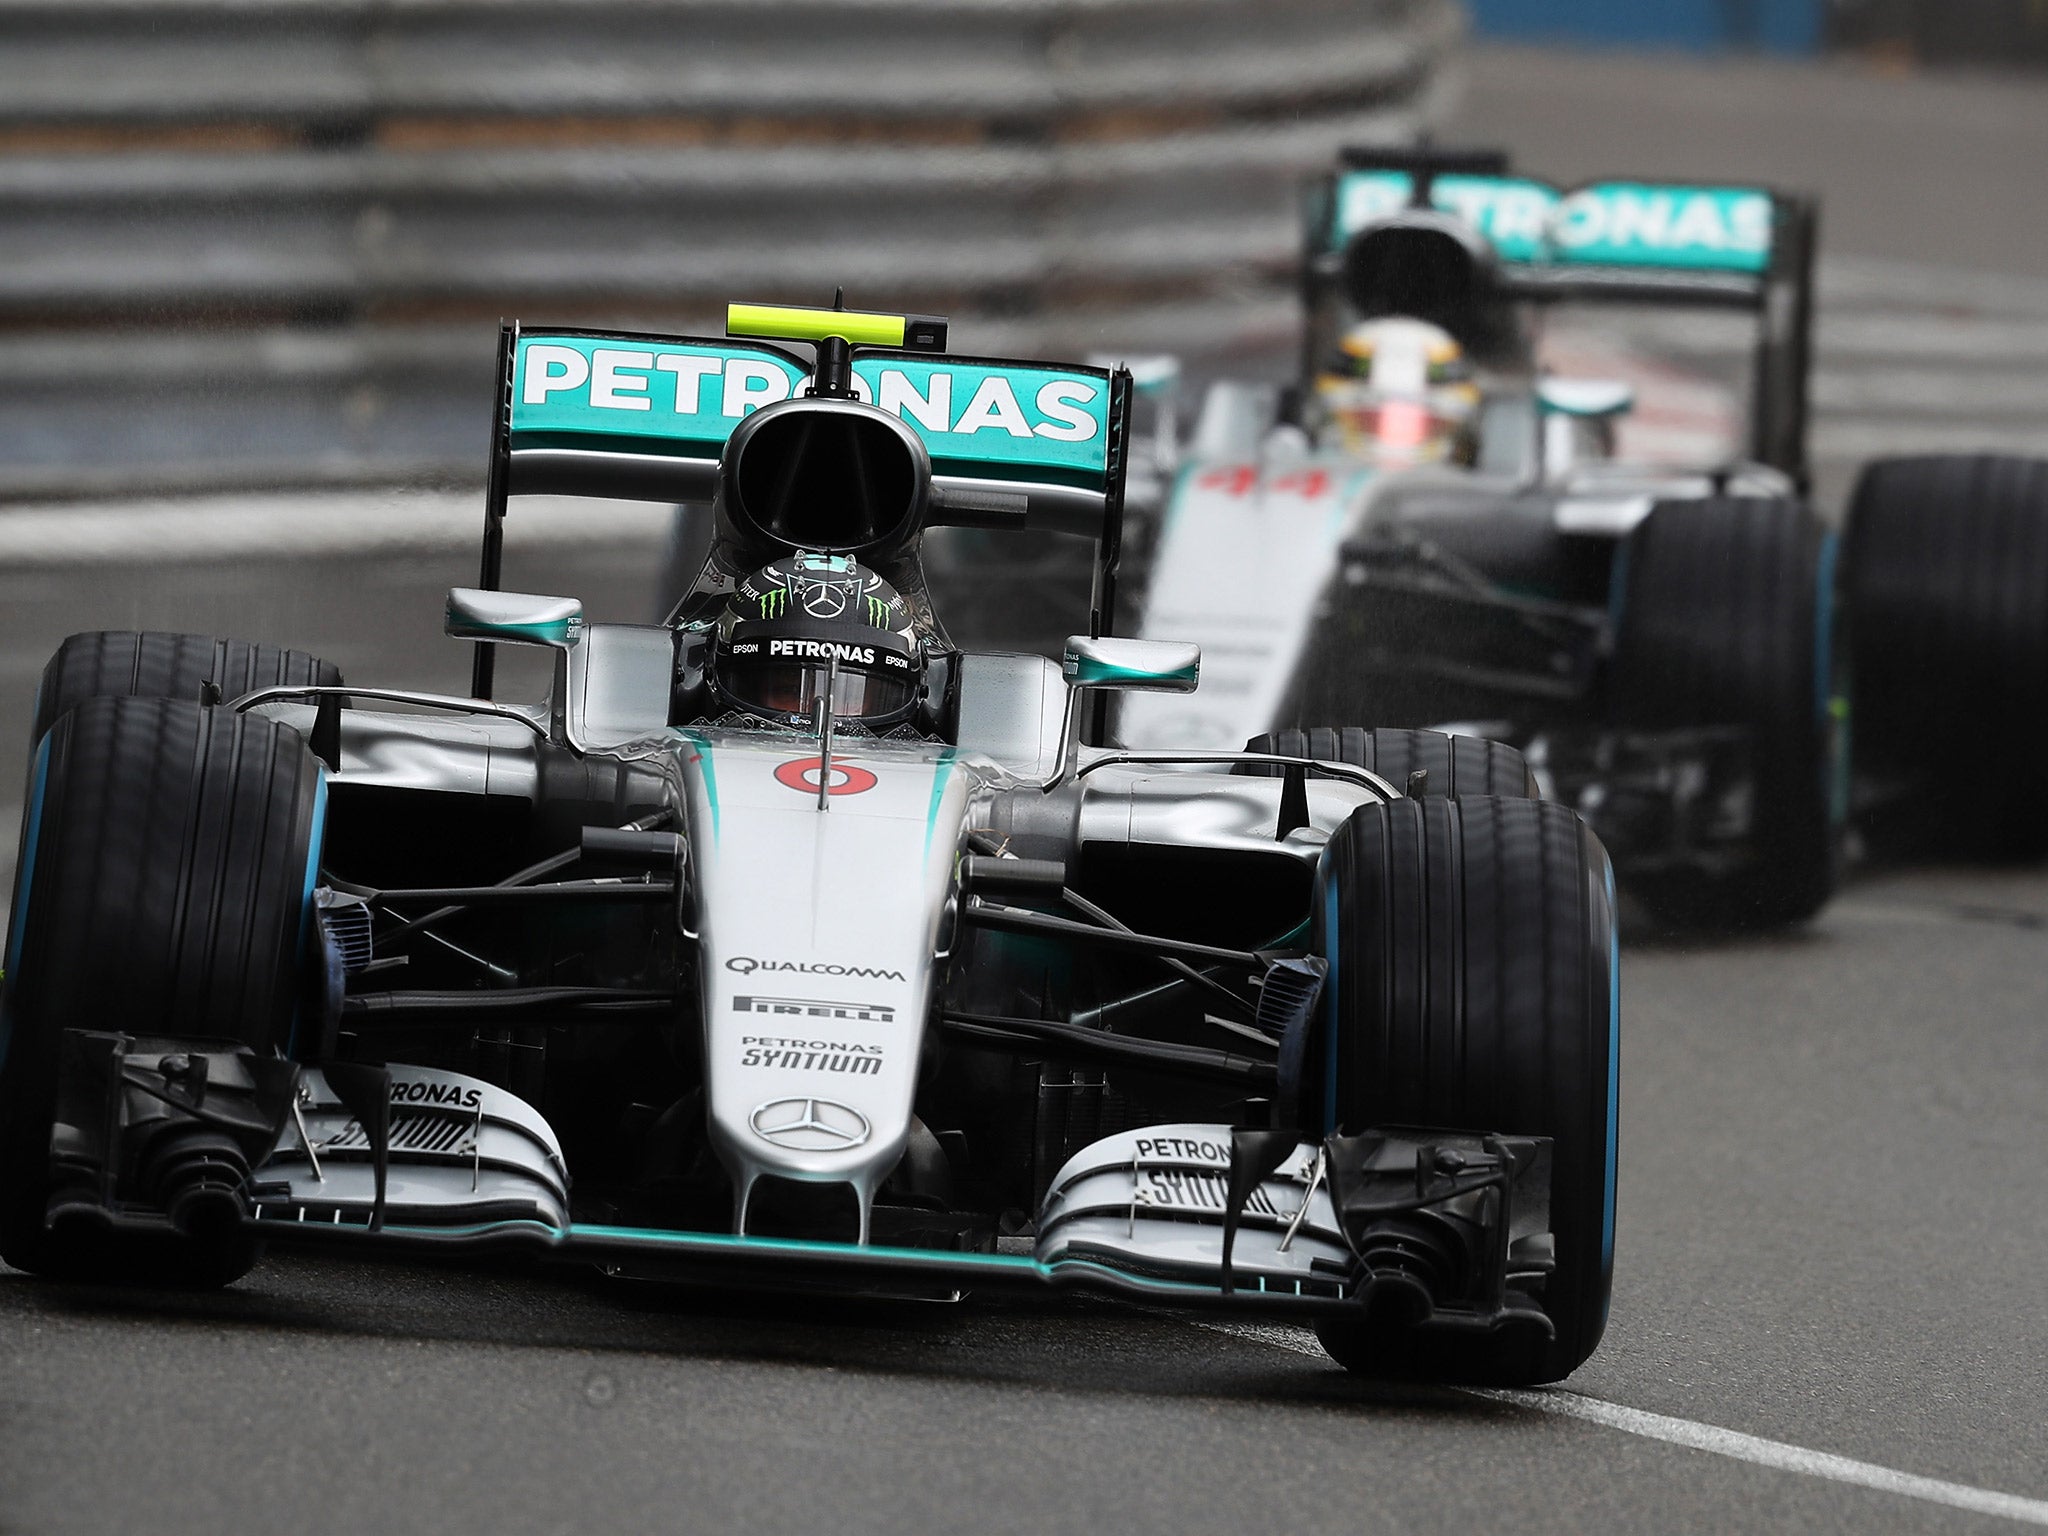 Nico Rosberg allowed Lewis Hamilton to pass him when Mercedes asked him to move over